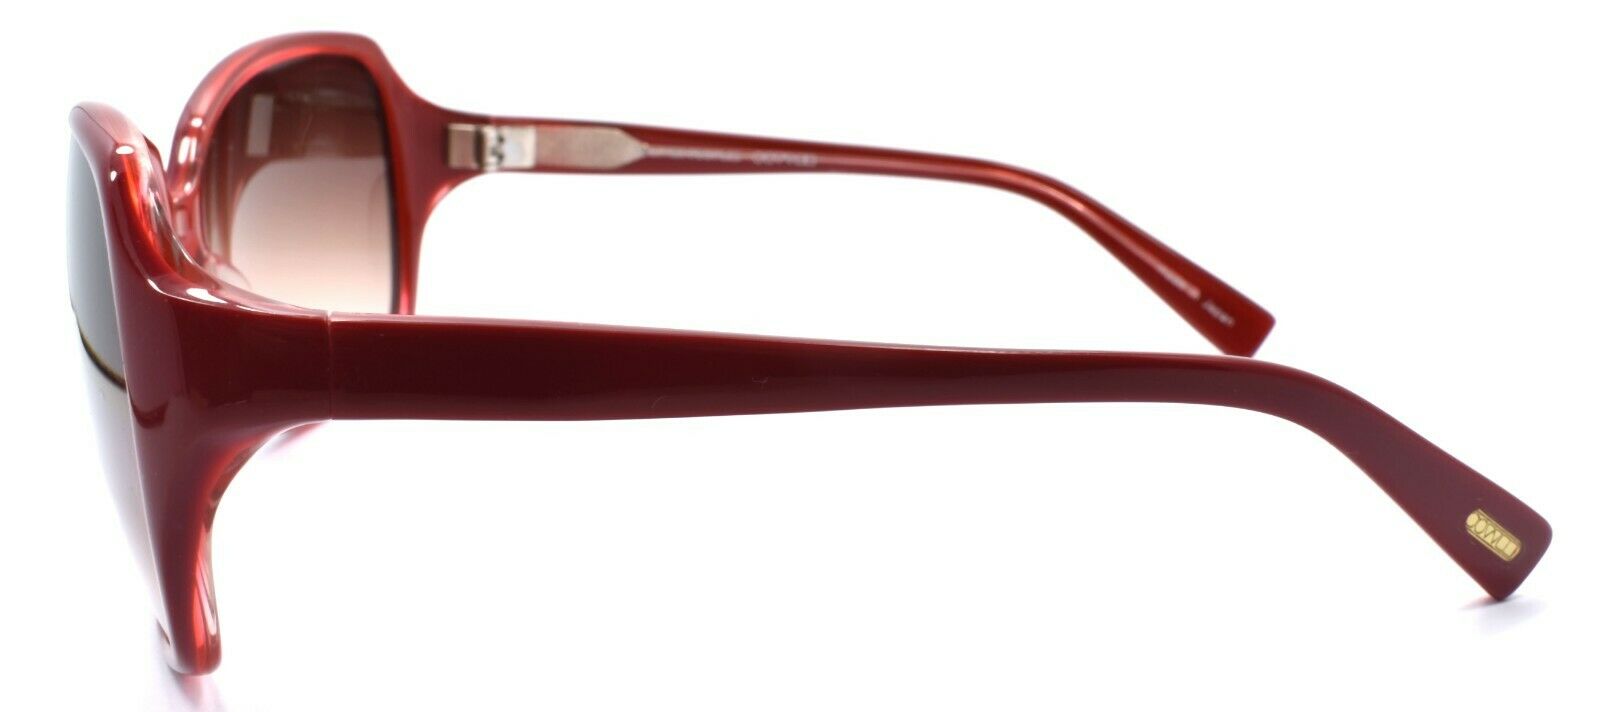 3-Oliver Peoples Candice SCA Women's Sunglasses Red / Brown Gradient JAPAN-Does not apply-IKSpecs